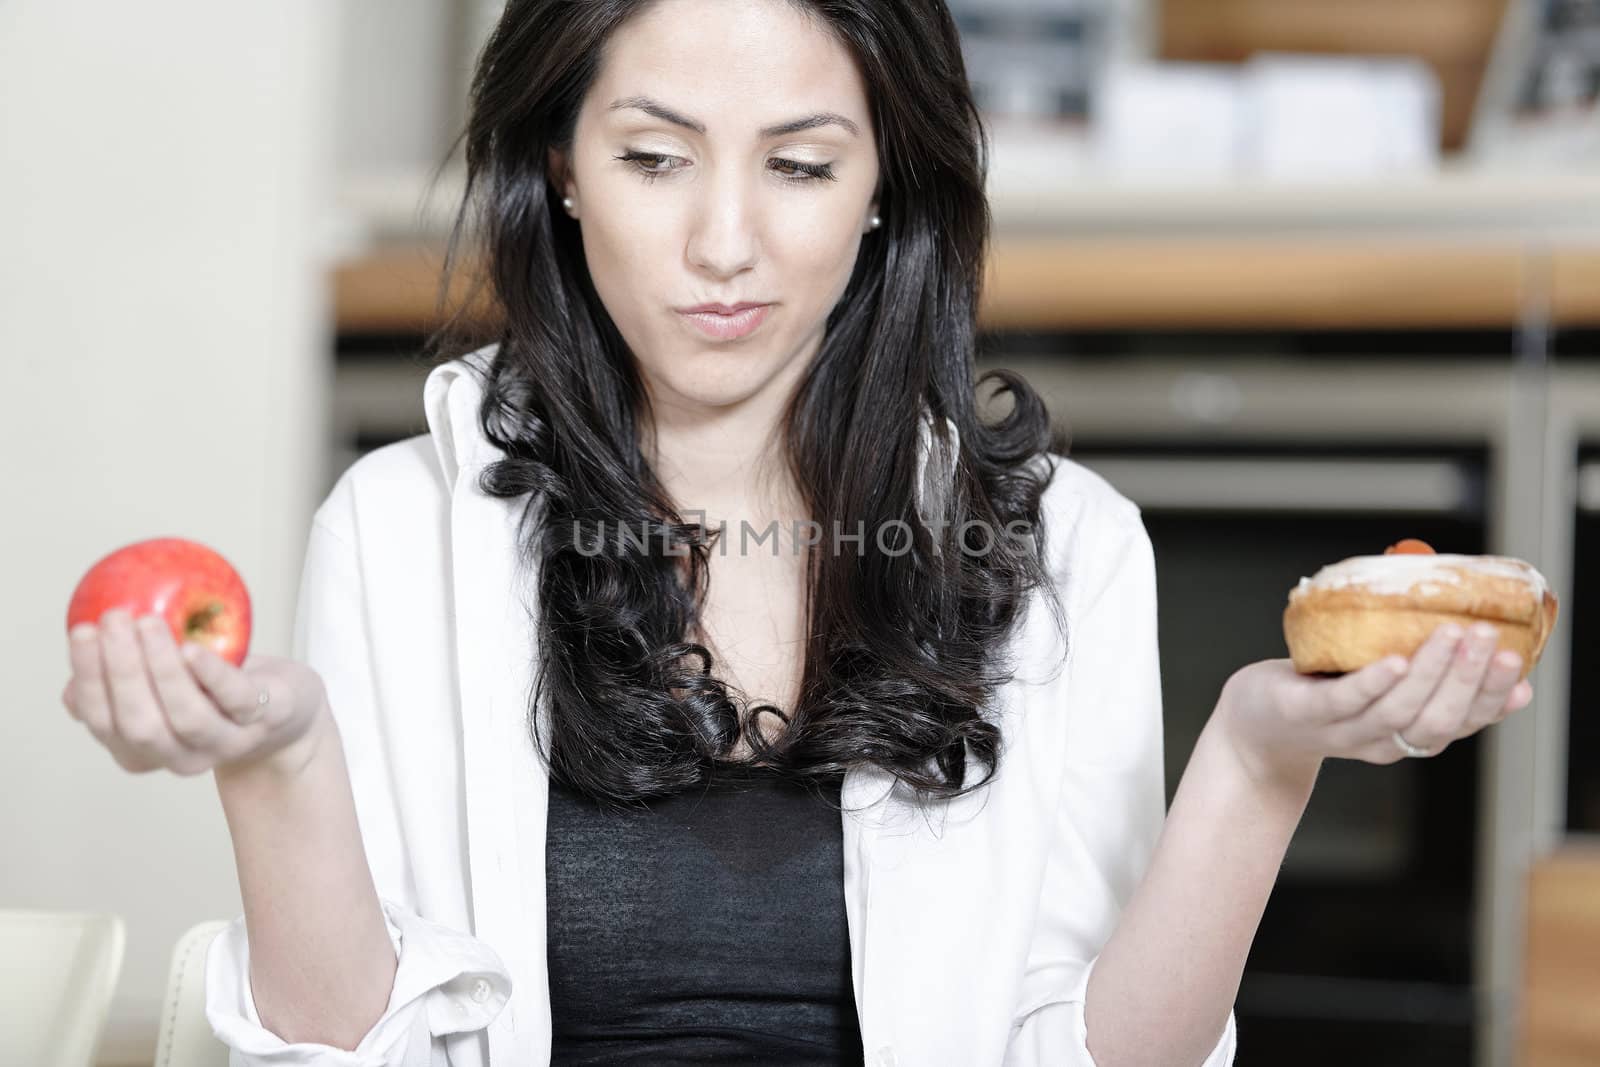 Attractive young woman choosing between a sticky cake or fresh fruit.